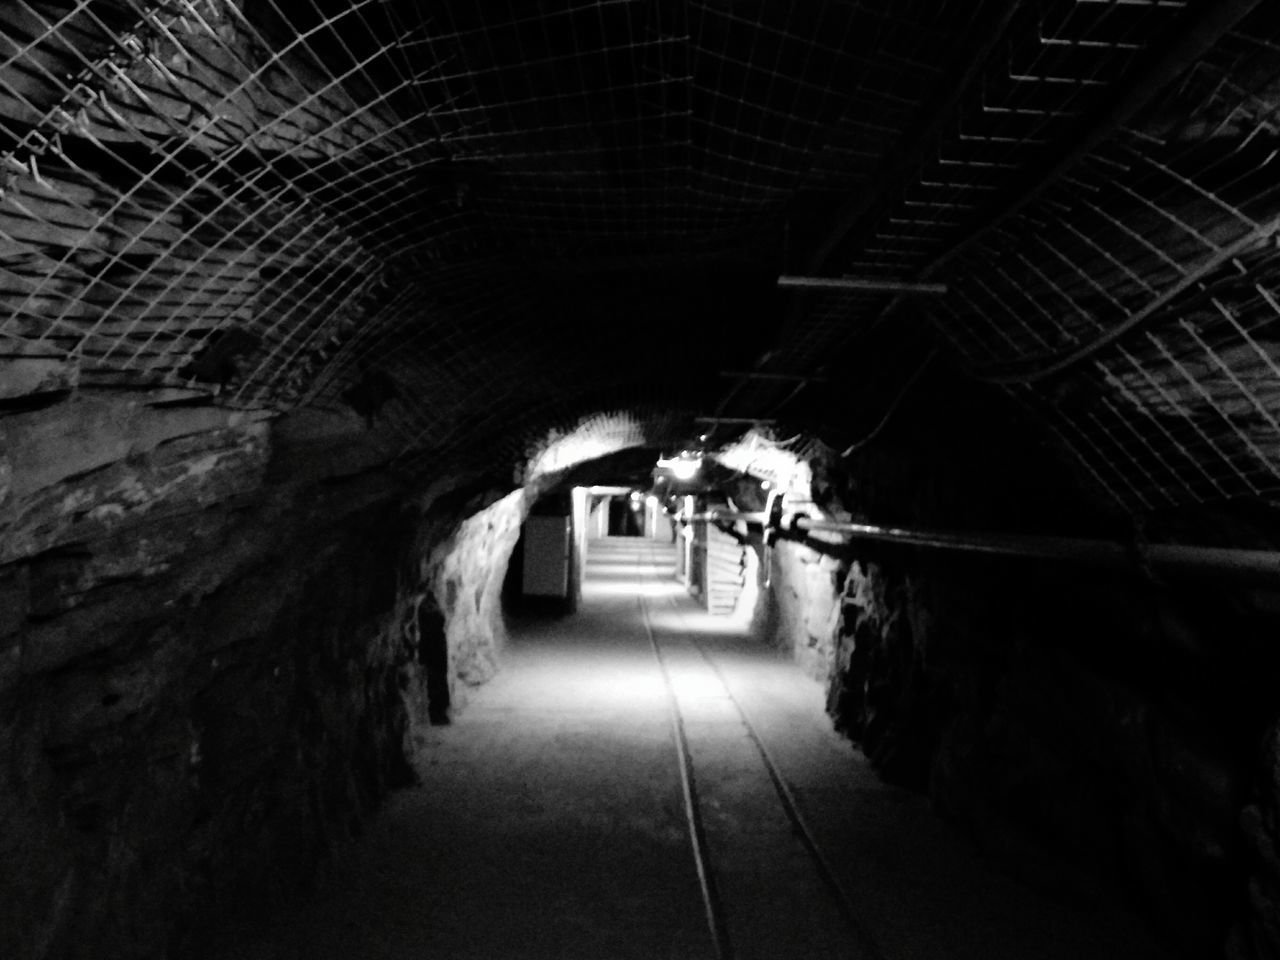 VIEW OF TUNNEL